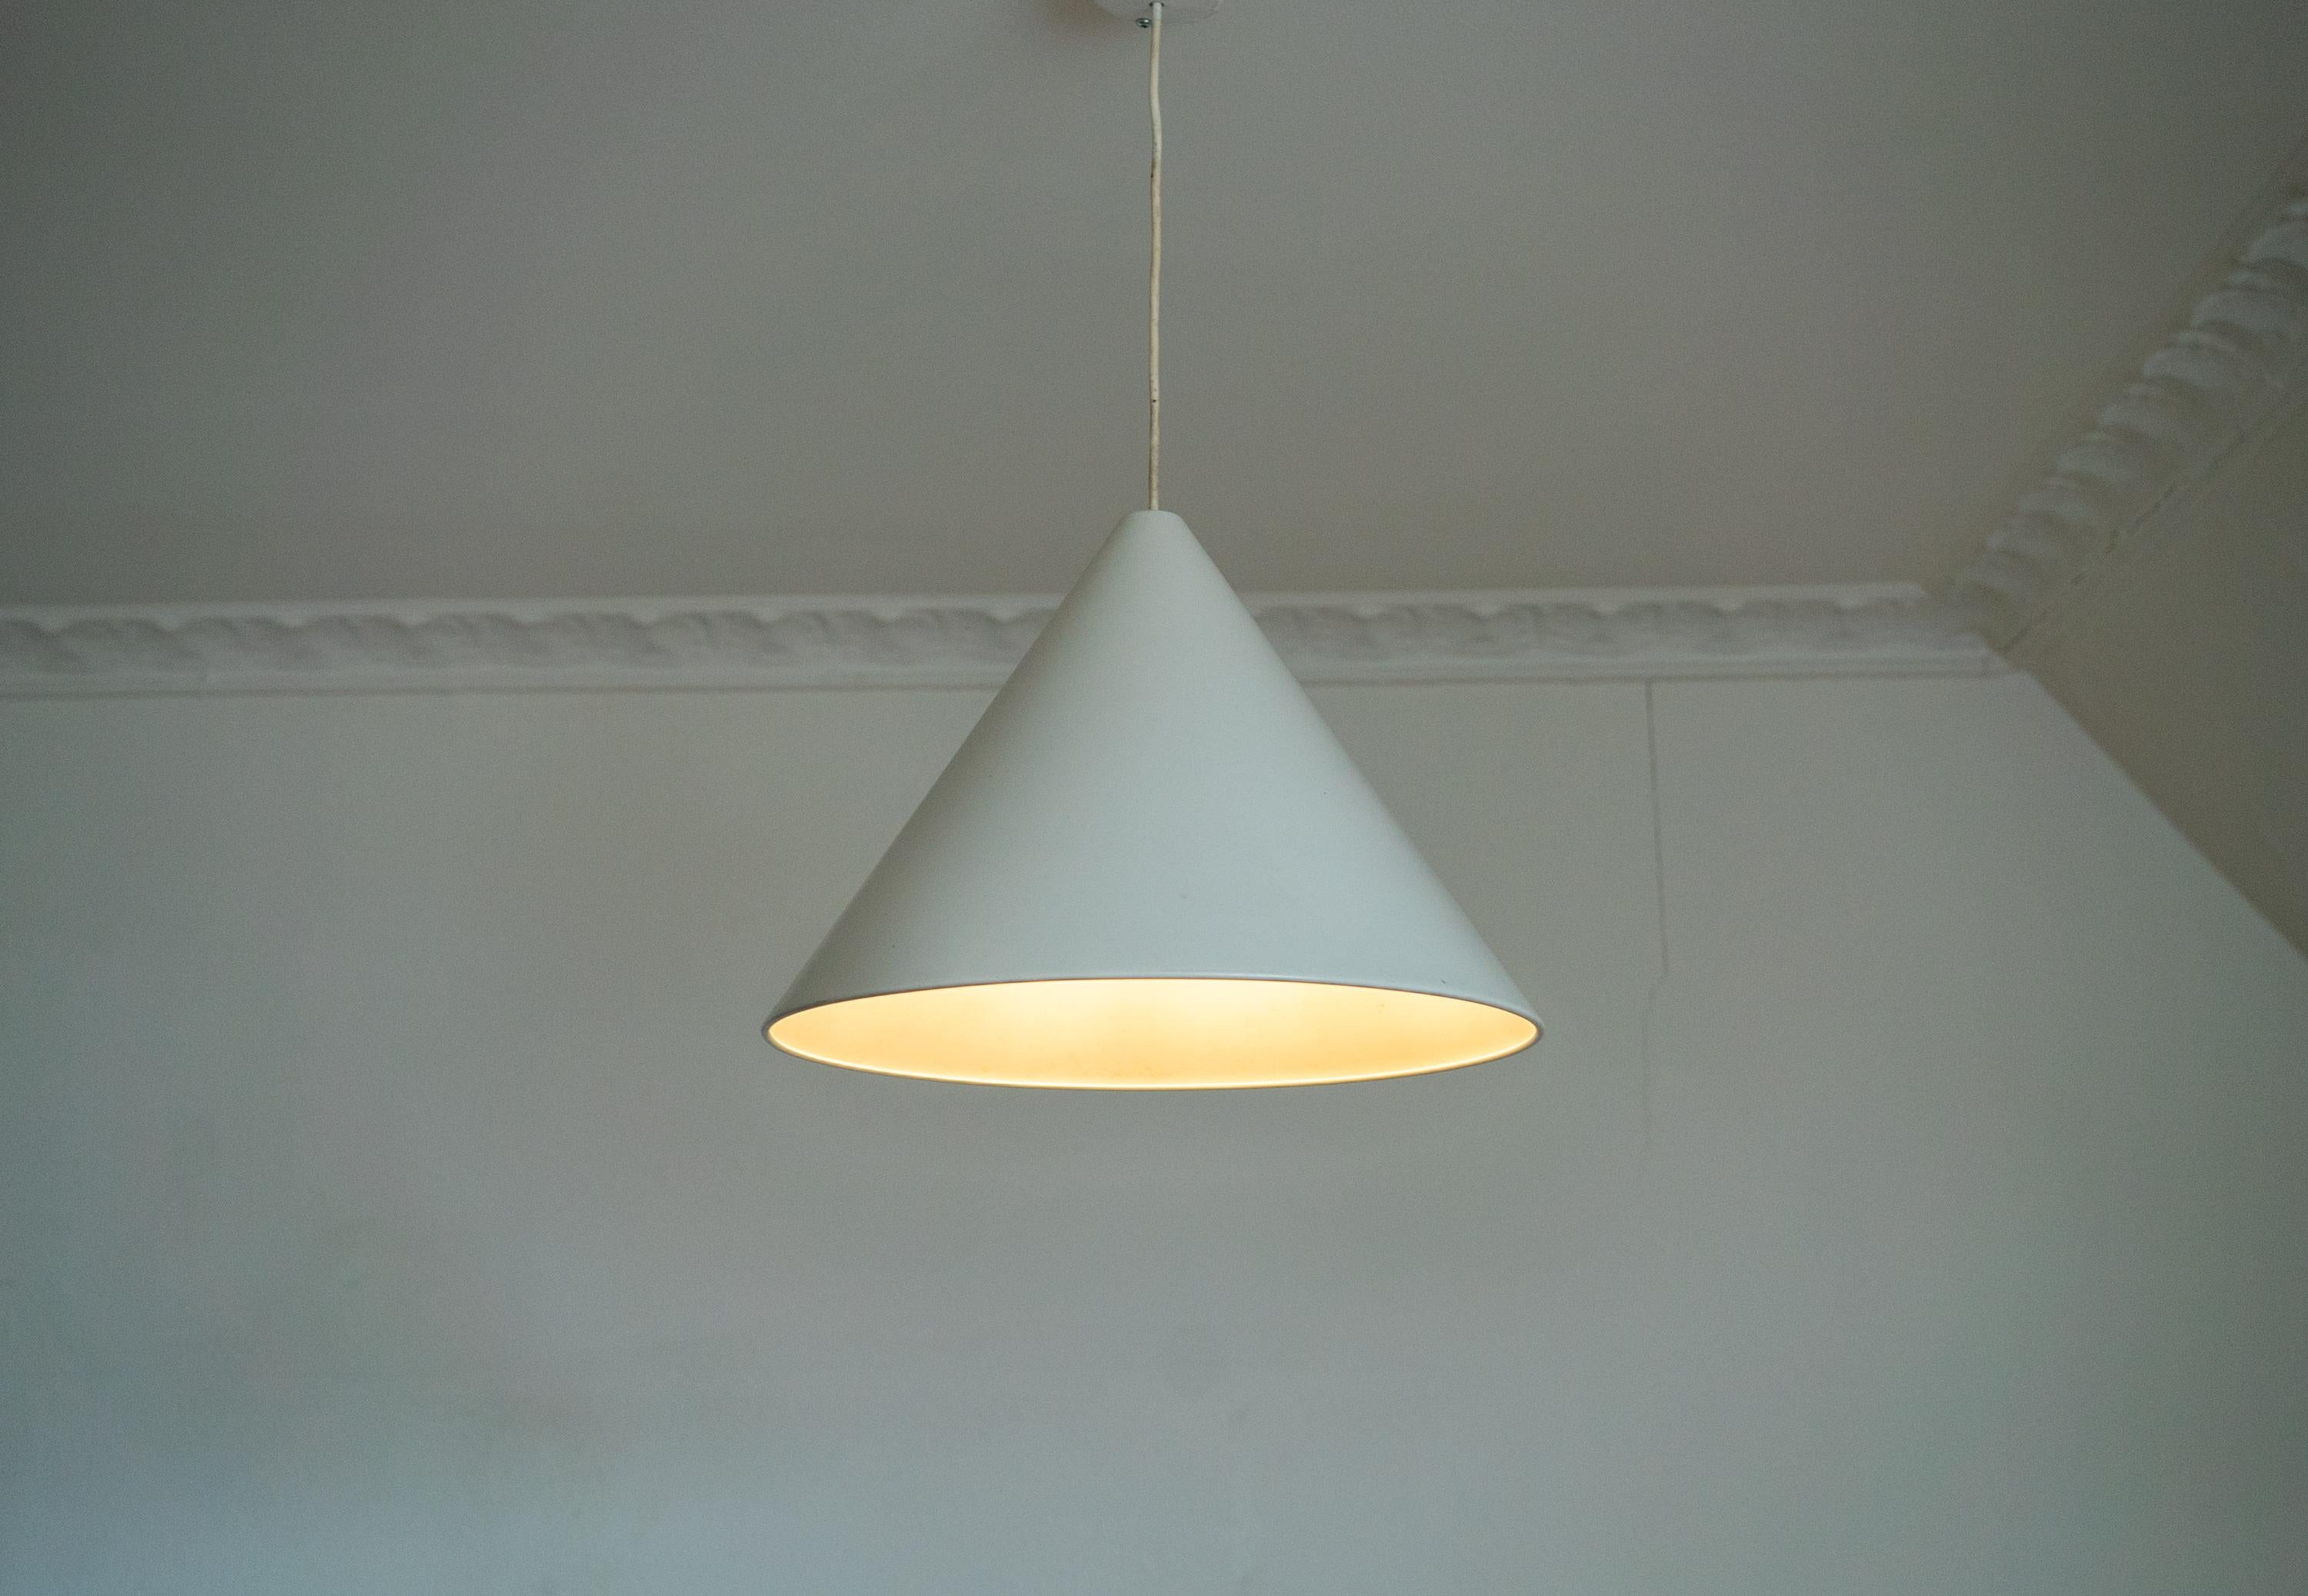 Large white  Arne Jacobsen Billiard hanging lamp designed by Arne Jacobsen for Louis Poulsen in the 1960s. These lamps provide direct down light and are often used for above billiard tables. The condition is still very good and the wiring has been